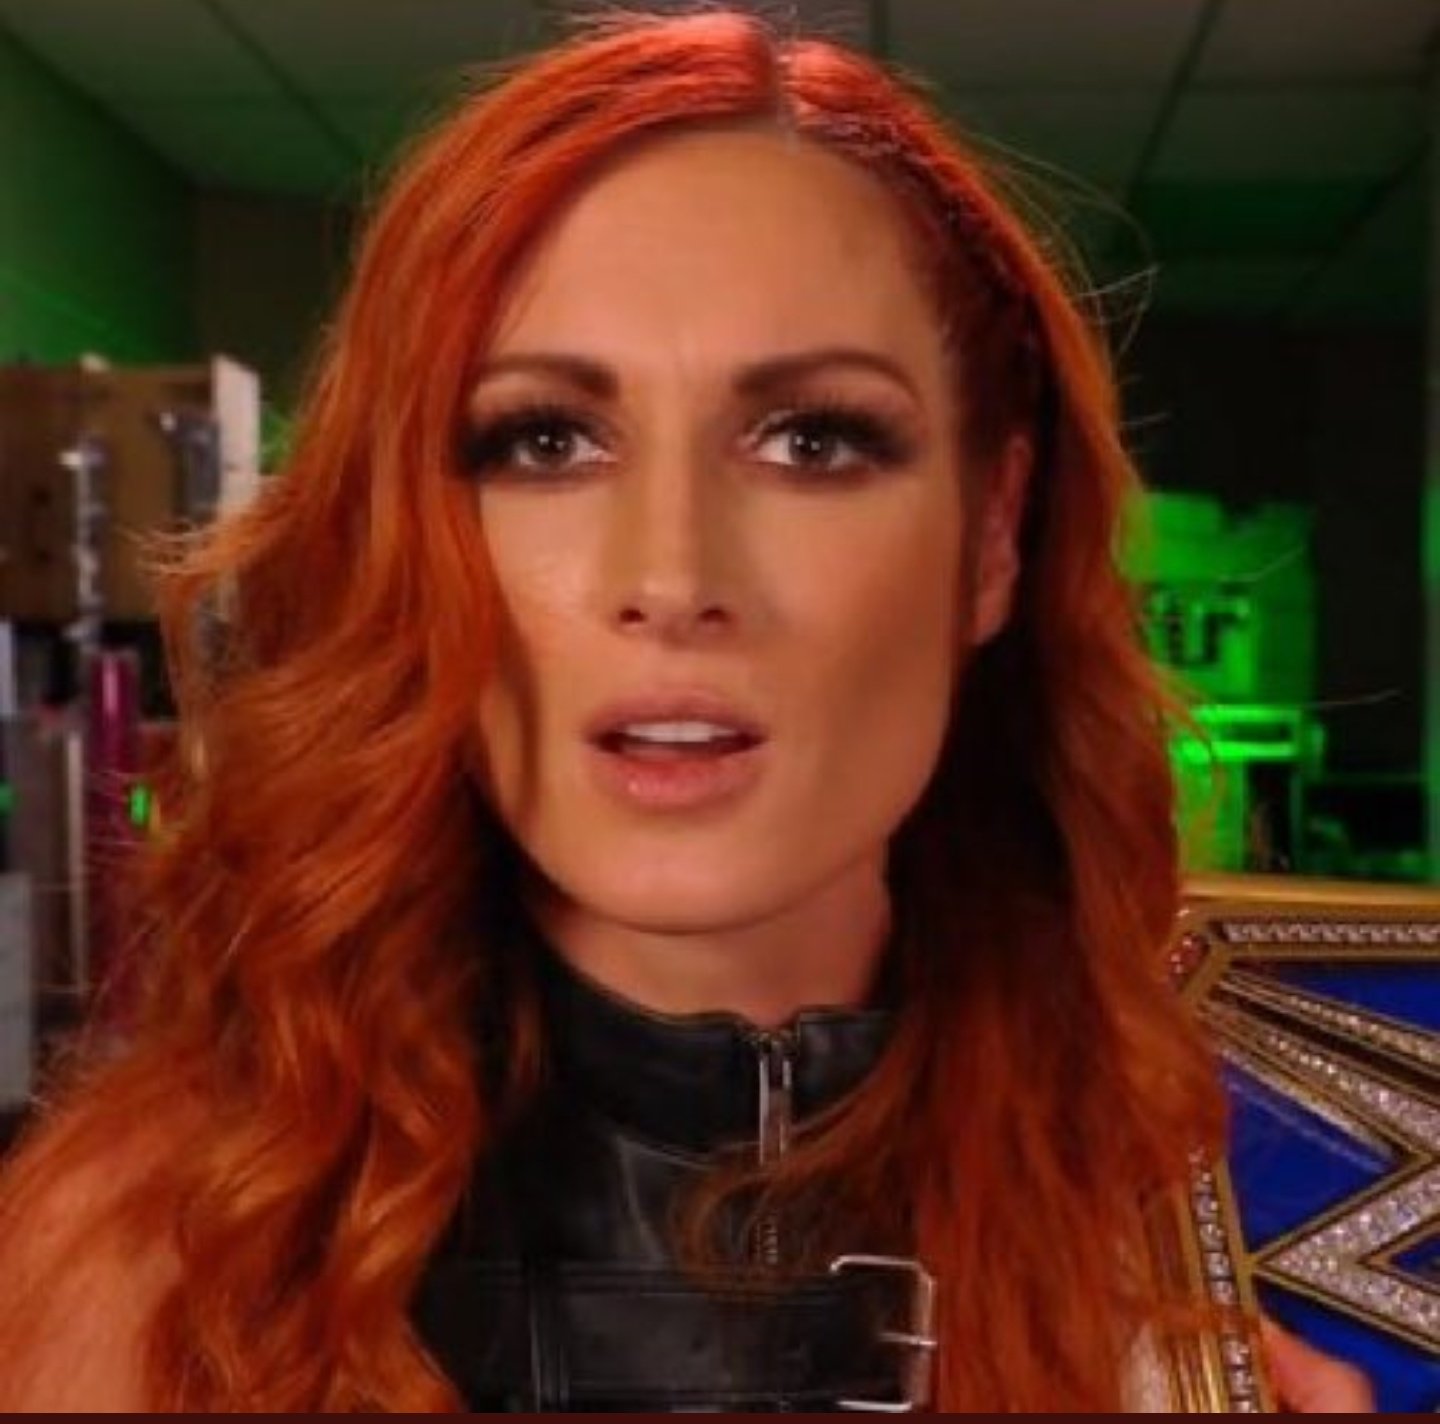 Ashley on X: Well I don't give a damn what Roman reigns does